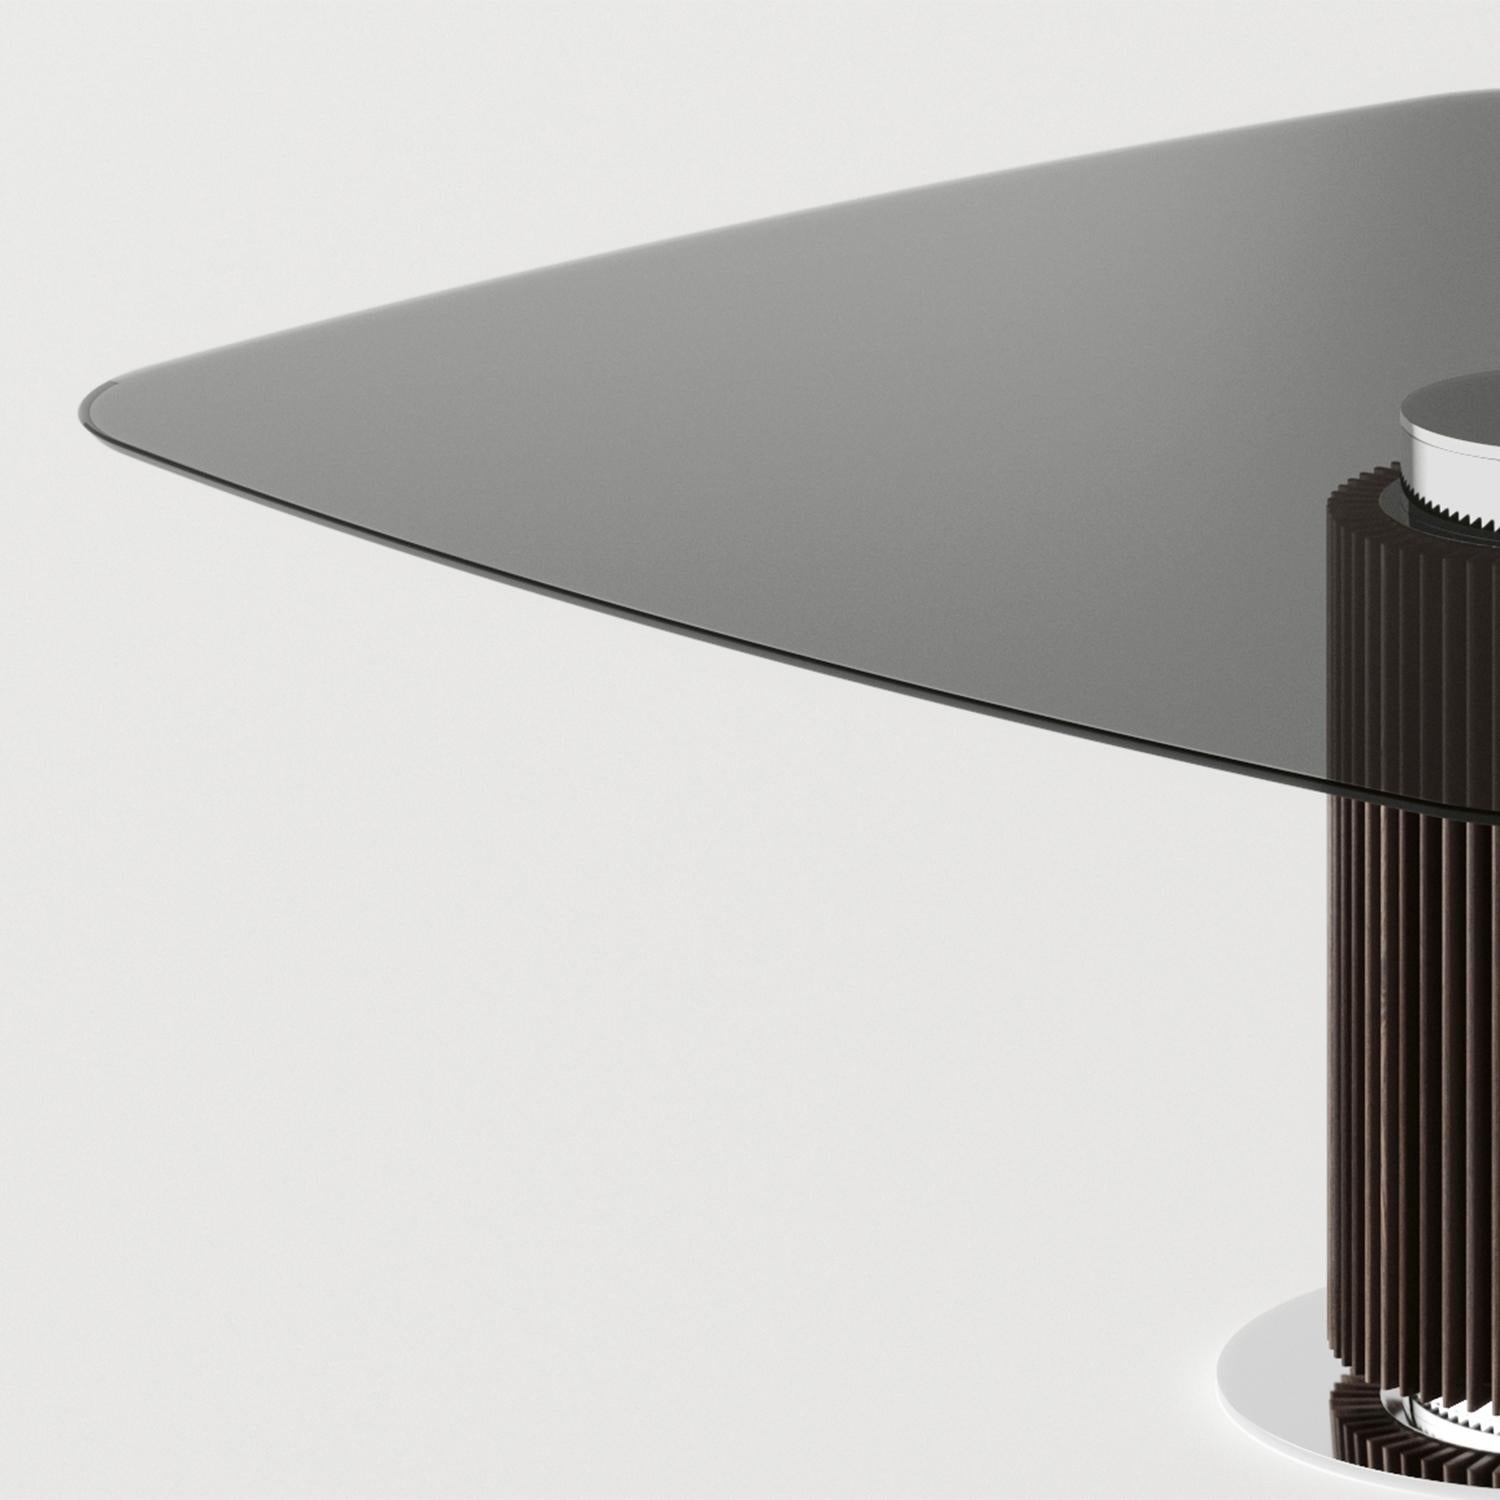 Dining Table Variation Square with central base in solid wood
in eucalyptus stained finish, with polished stainless steel ground 
base and with up central base in polished stainless steel finish.
With smocked glass top with rounded corners.